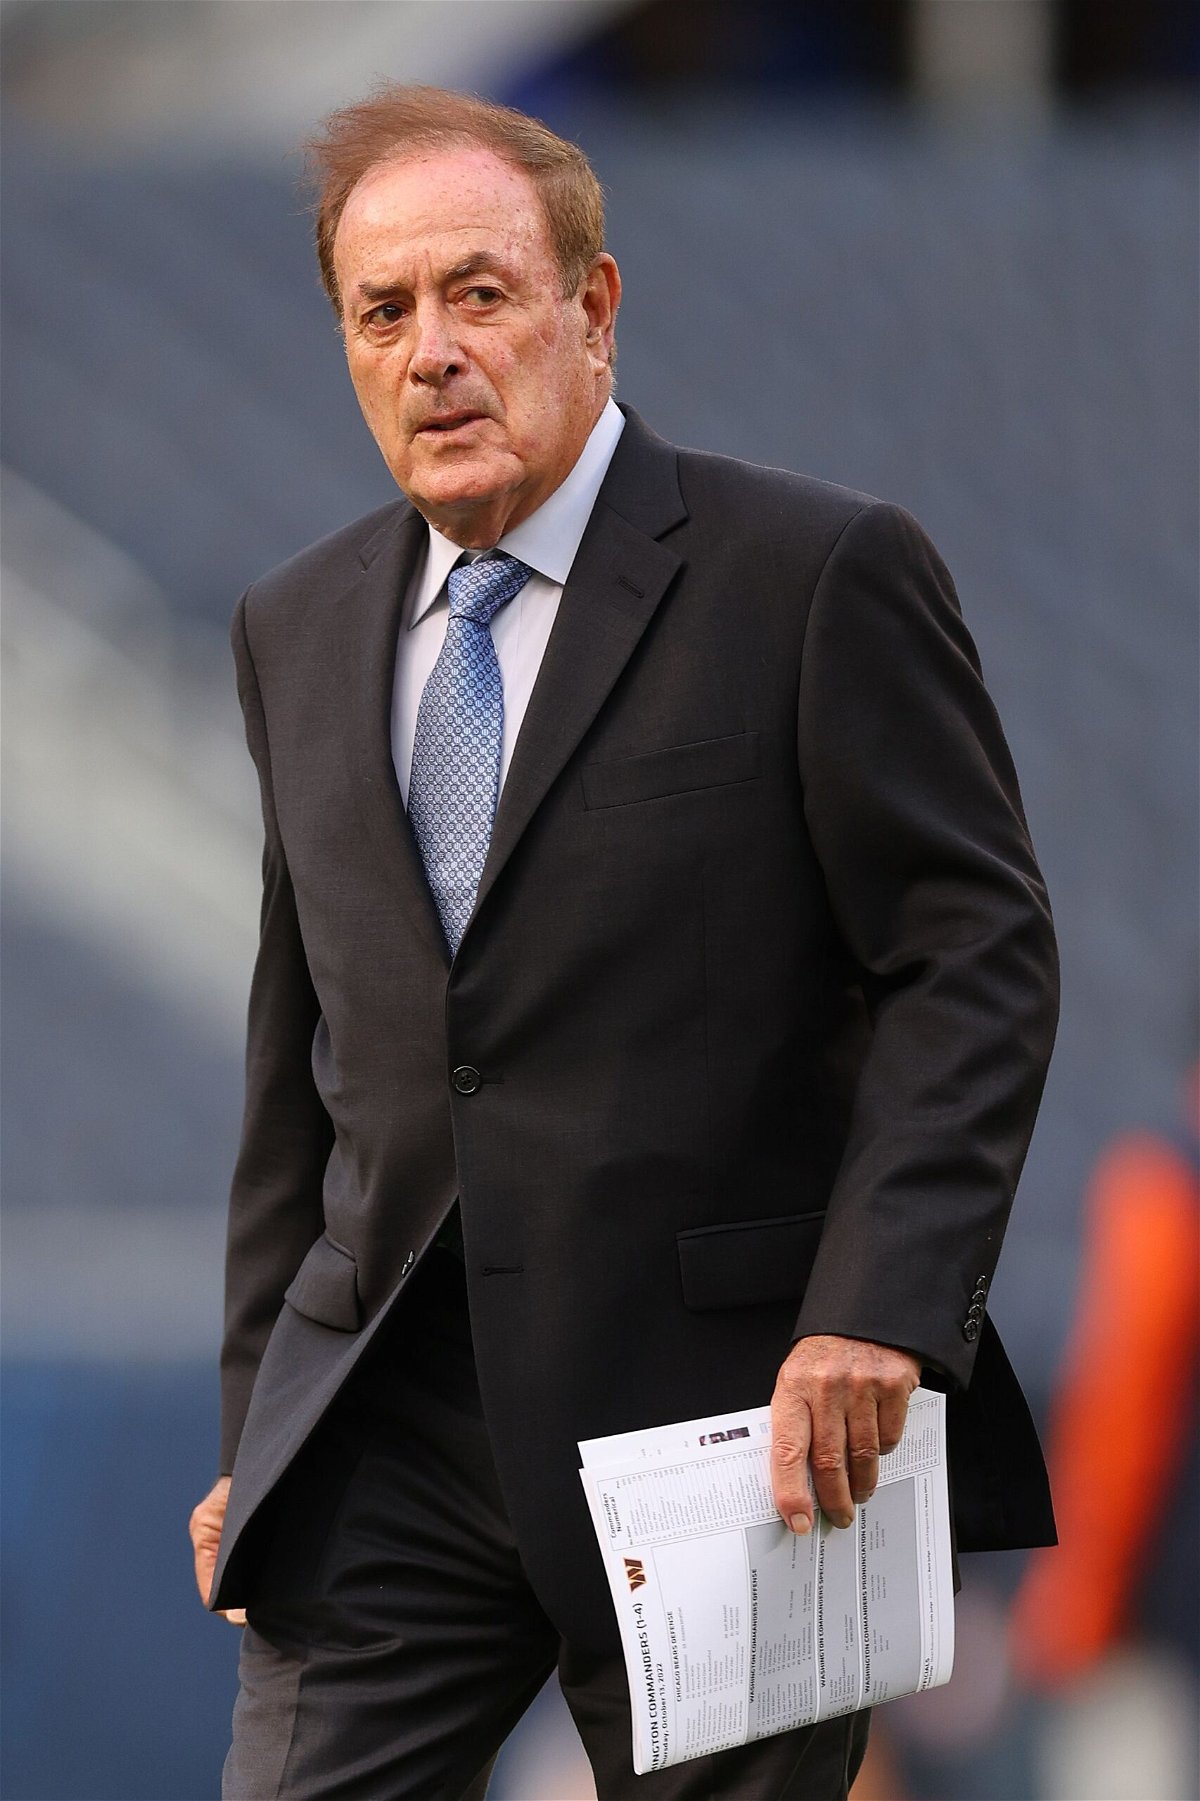 <i>Michael Reaves/Getty Images via CNN Newsource</i><br />Sports commentator Al Michaels looks on prior to the game between the Chicago Bears and the Washington Commanders at Soldier Field in October 2022 in Chicago